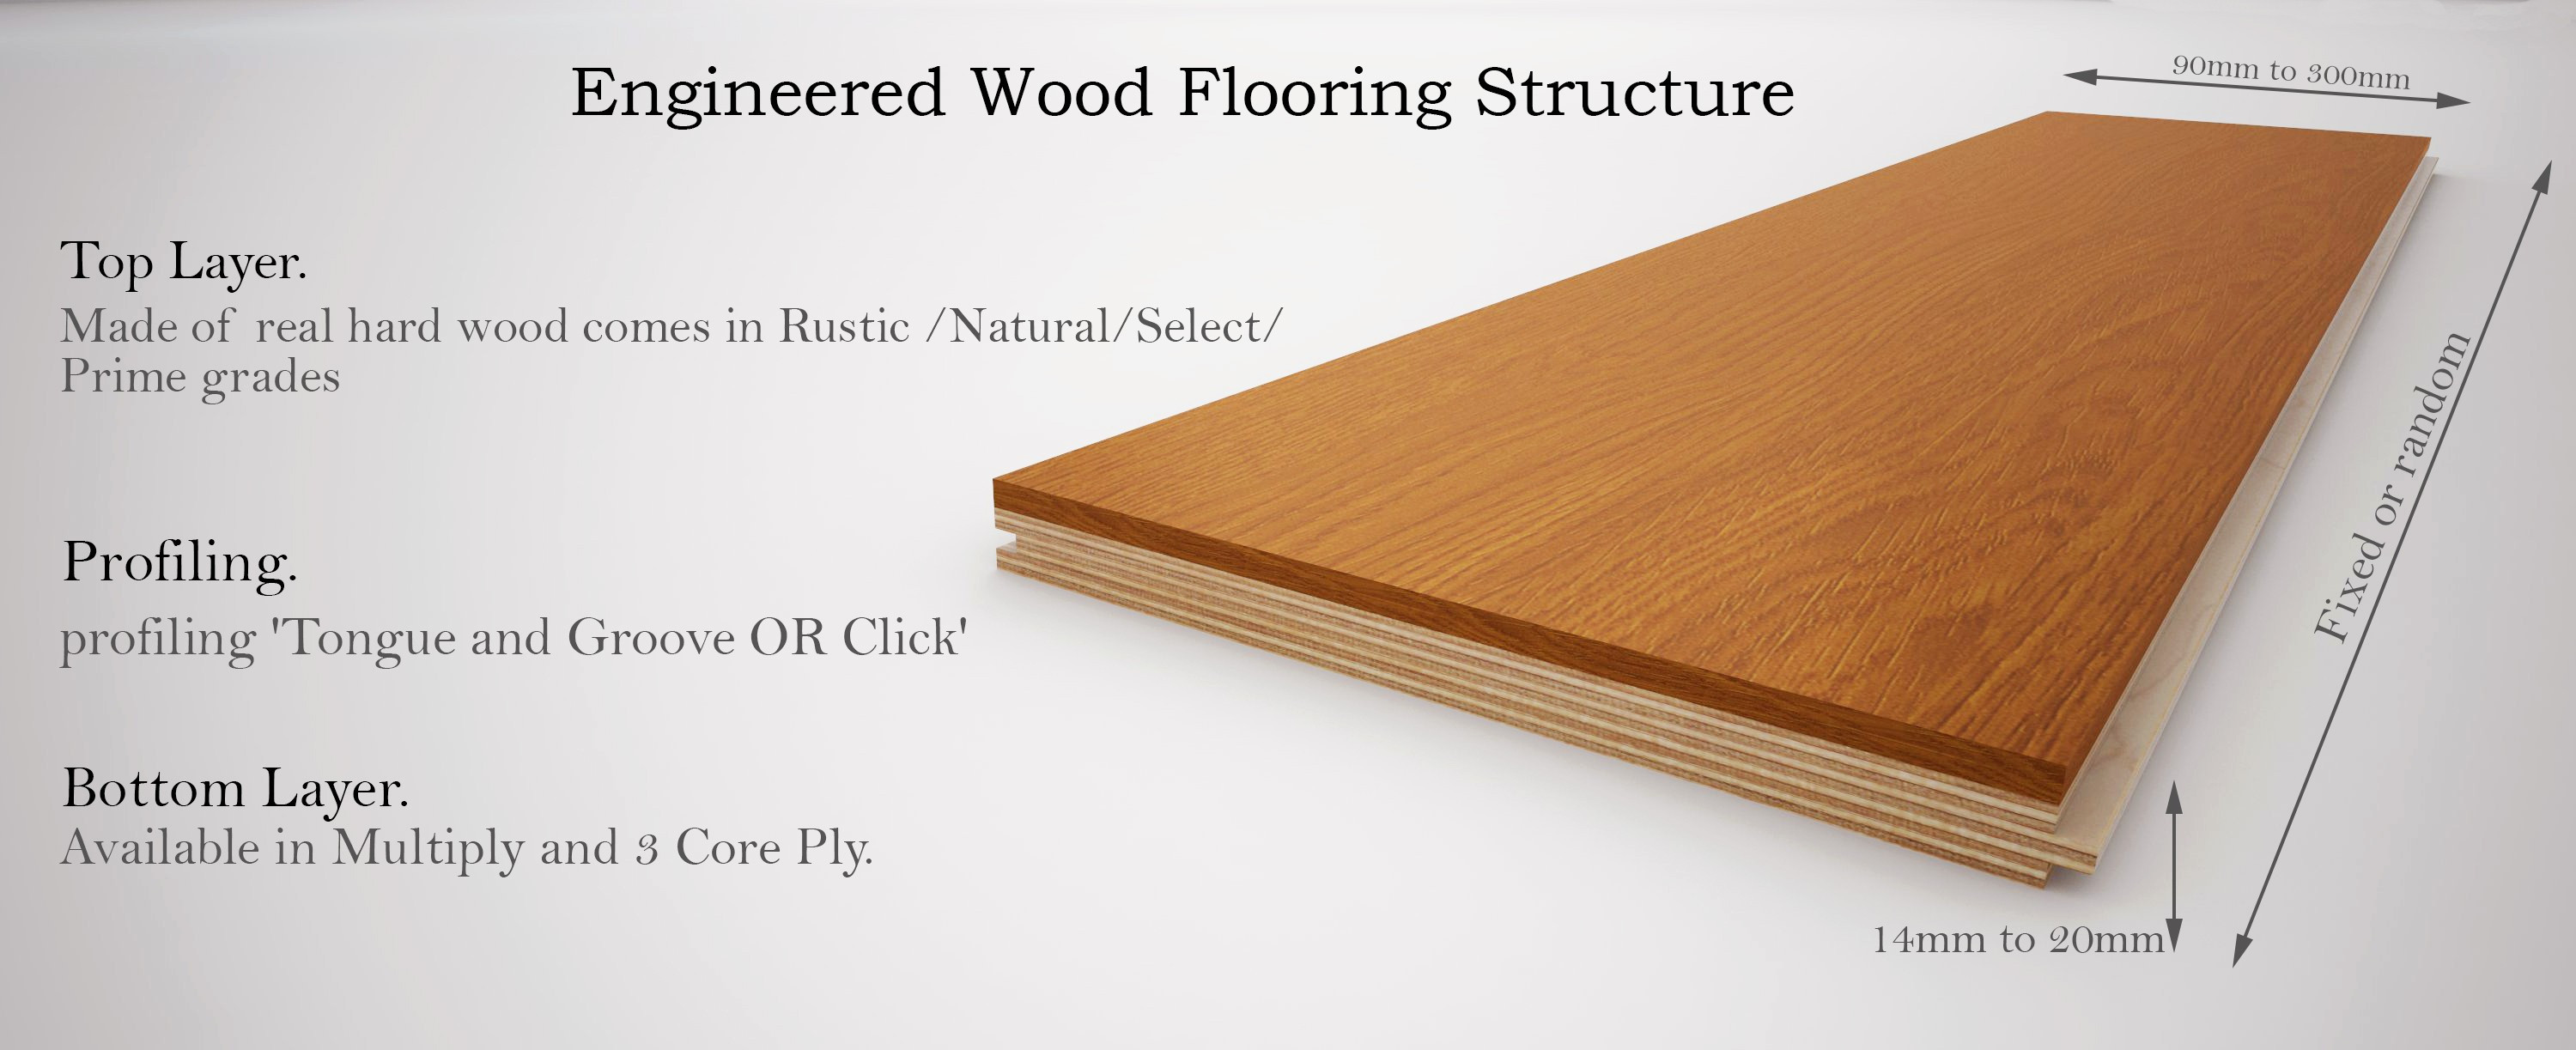 14 Great Cost to Refinish Prefinished Hardwood Floors 2024 free download cost to refinish prefinished hardwood floors of 14 new average cost for hardwood floors stock dizpos com for average cost for hardwood floors new 50 unique average cost hardwood floors pics 